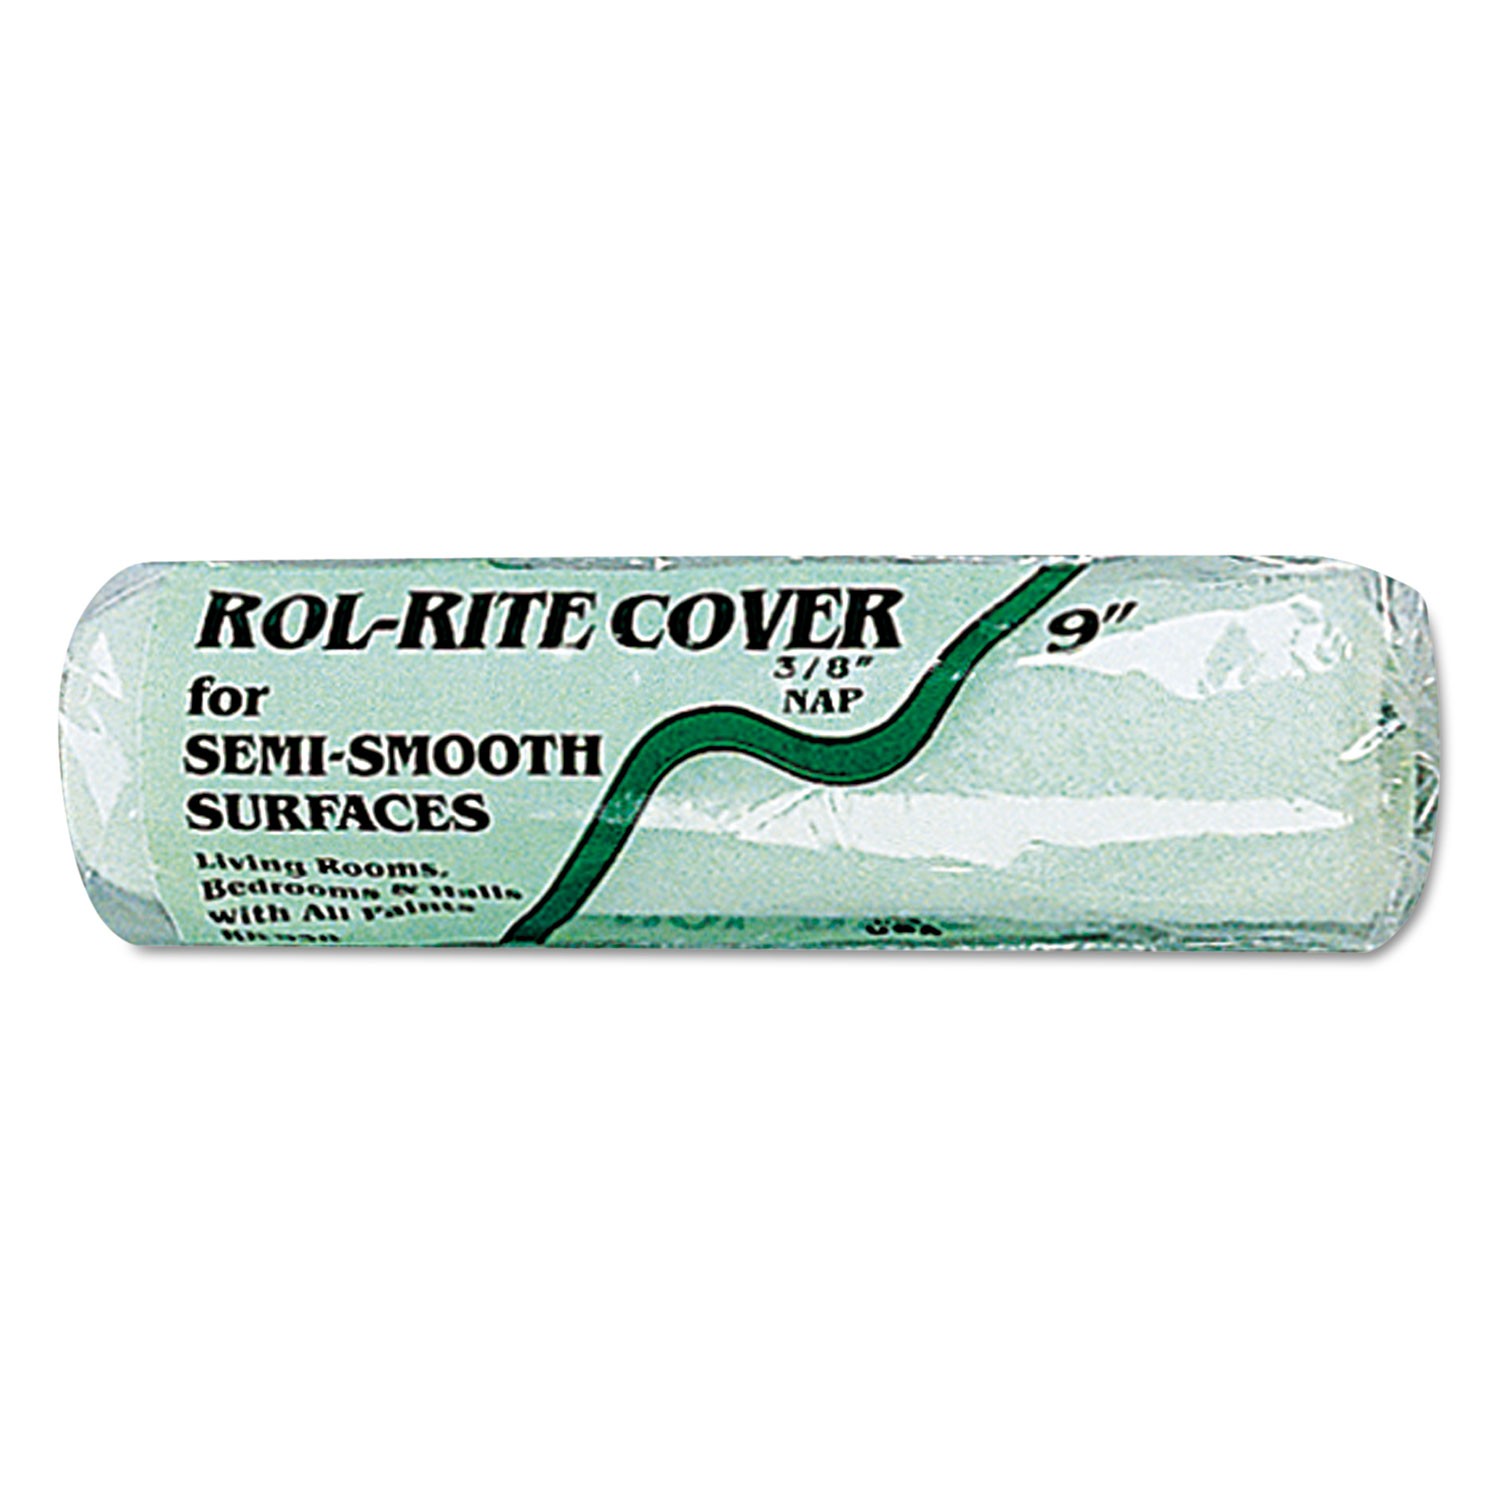 Semi-Smooth Paint Roller Cover, 3/8 Nap, 3, Green